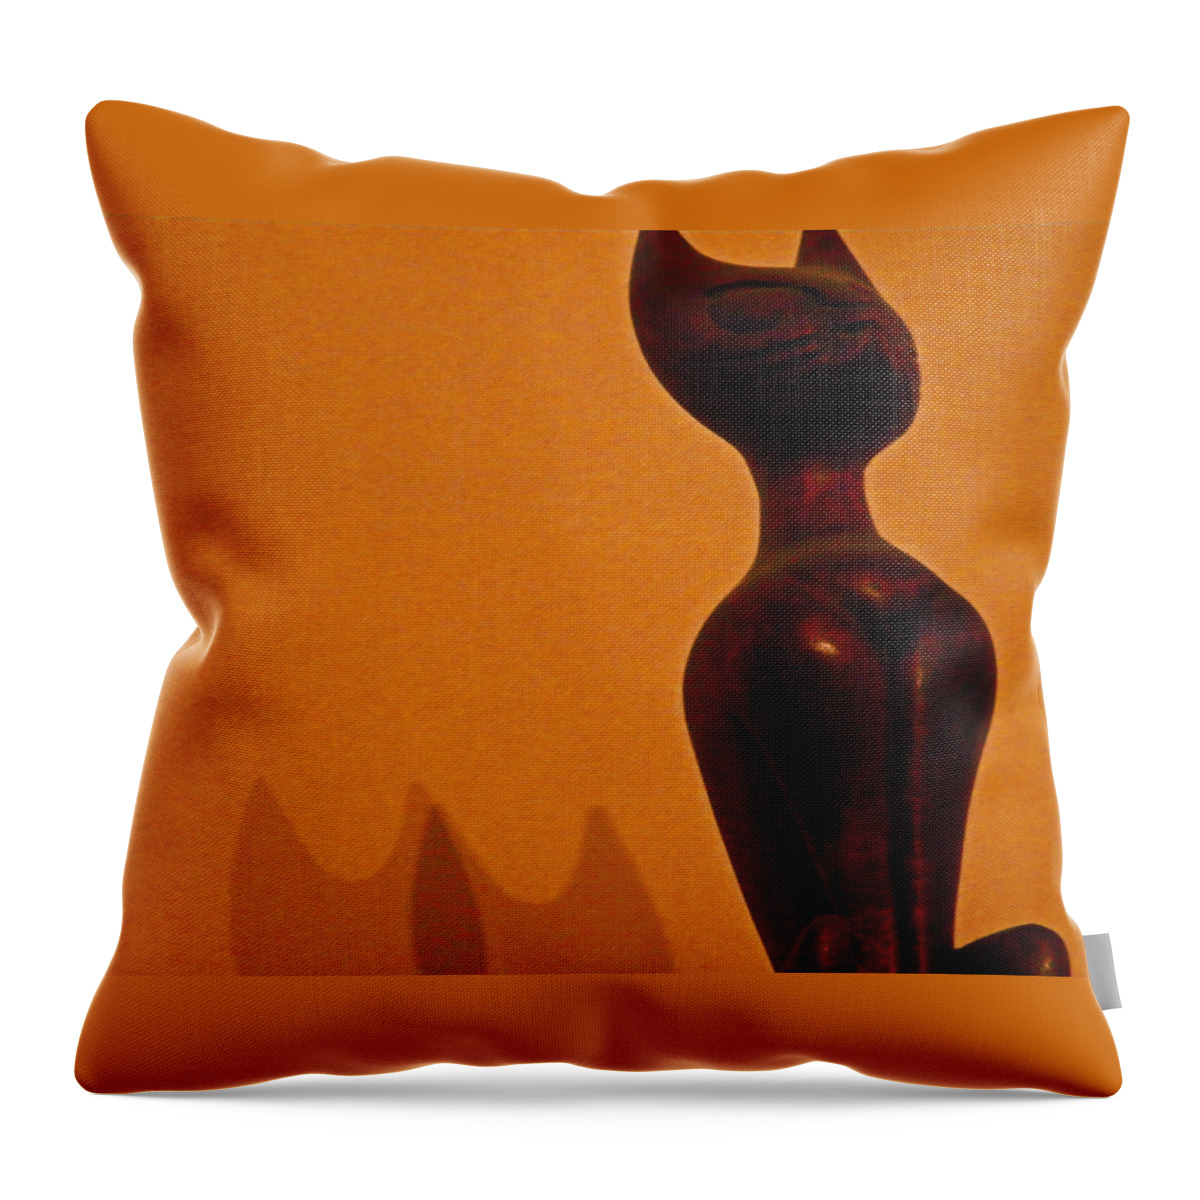 Abstract Throw Pillow featuring the photograph Cats by Lenore Senior